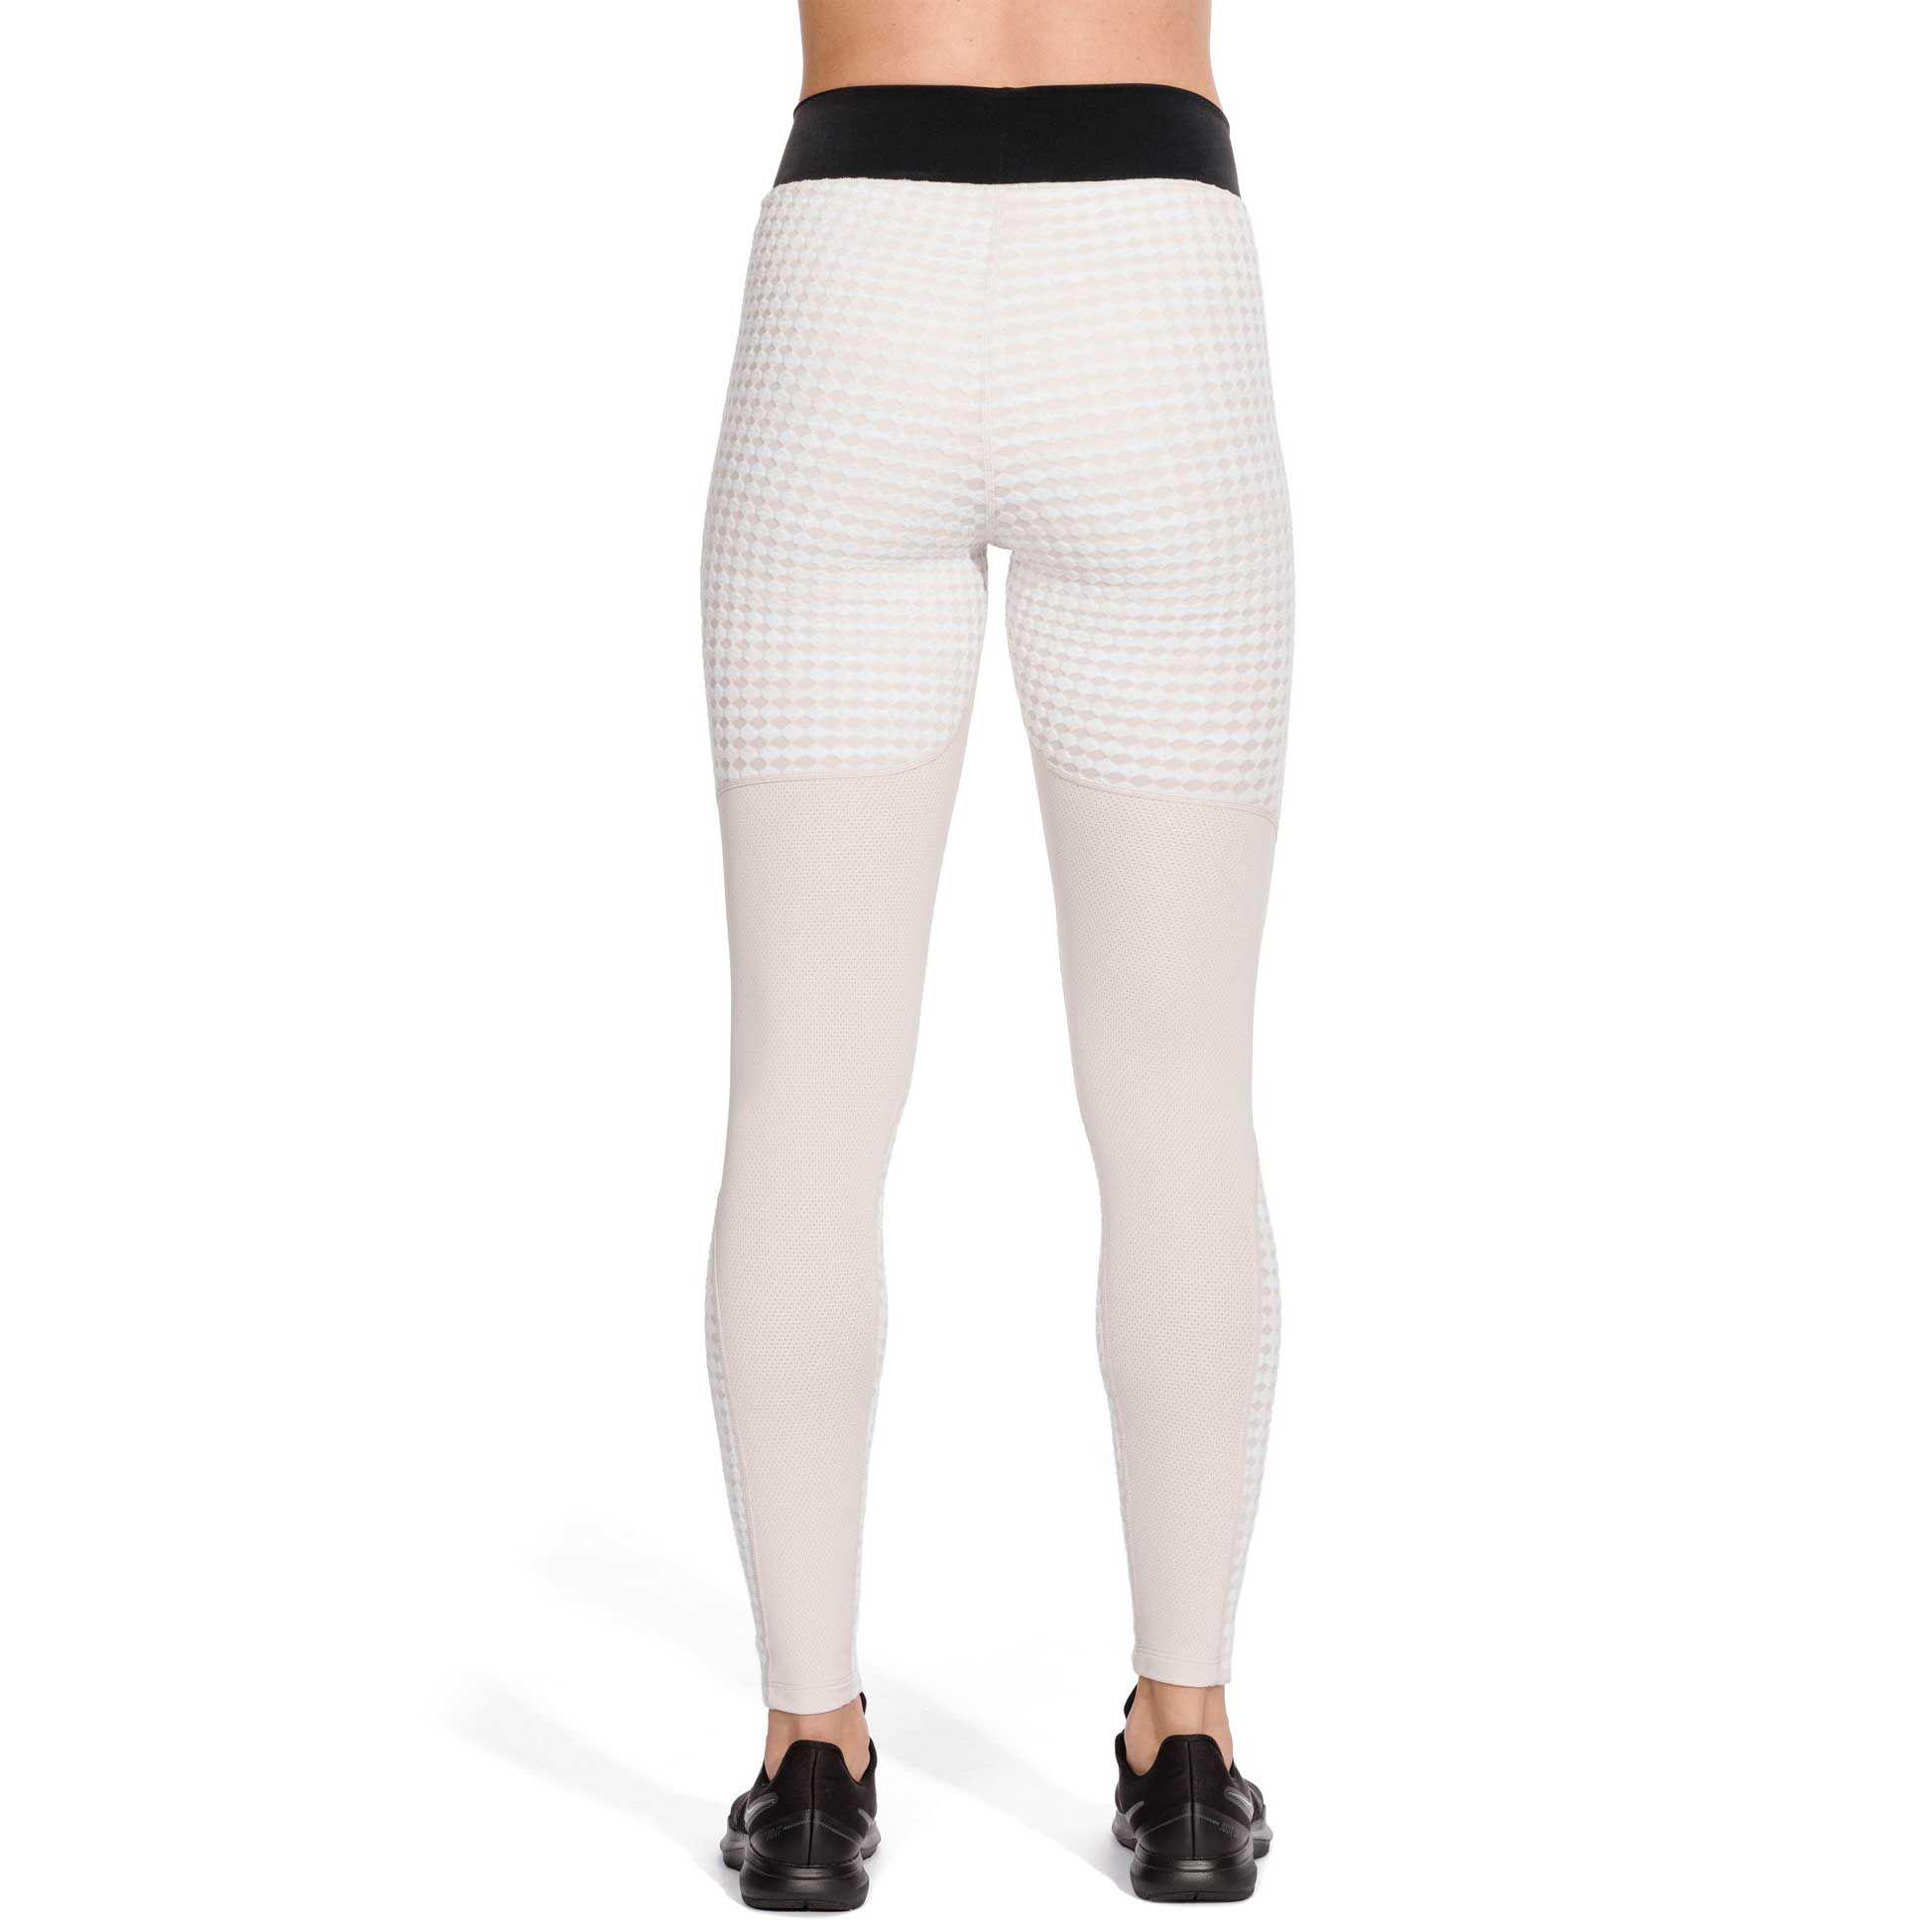 Nike Synthetic Pro Hyperwarm Training Tights in Desert Sand (Natural) | Lyst